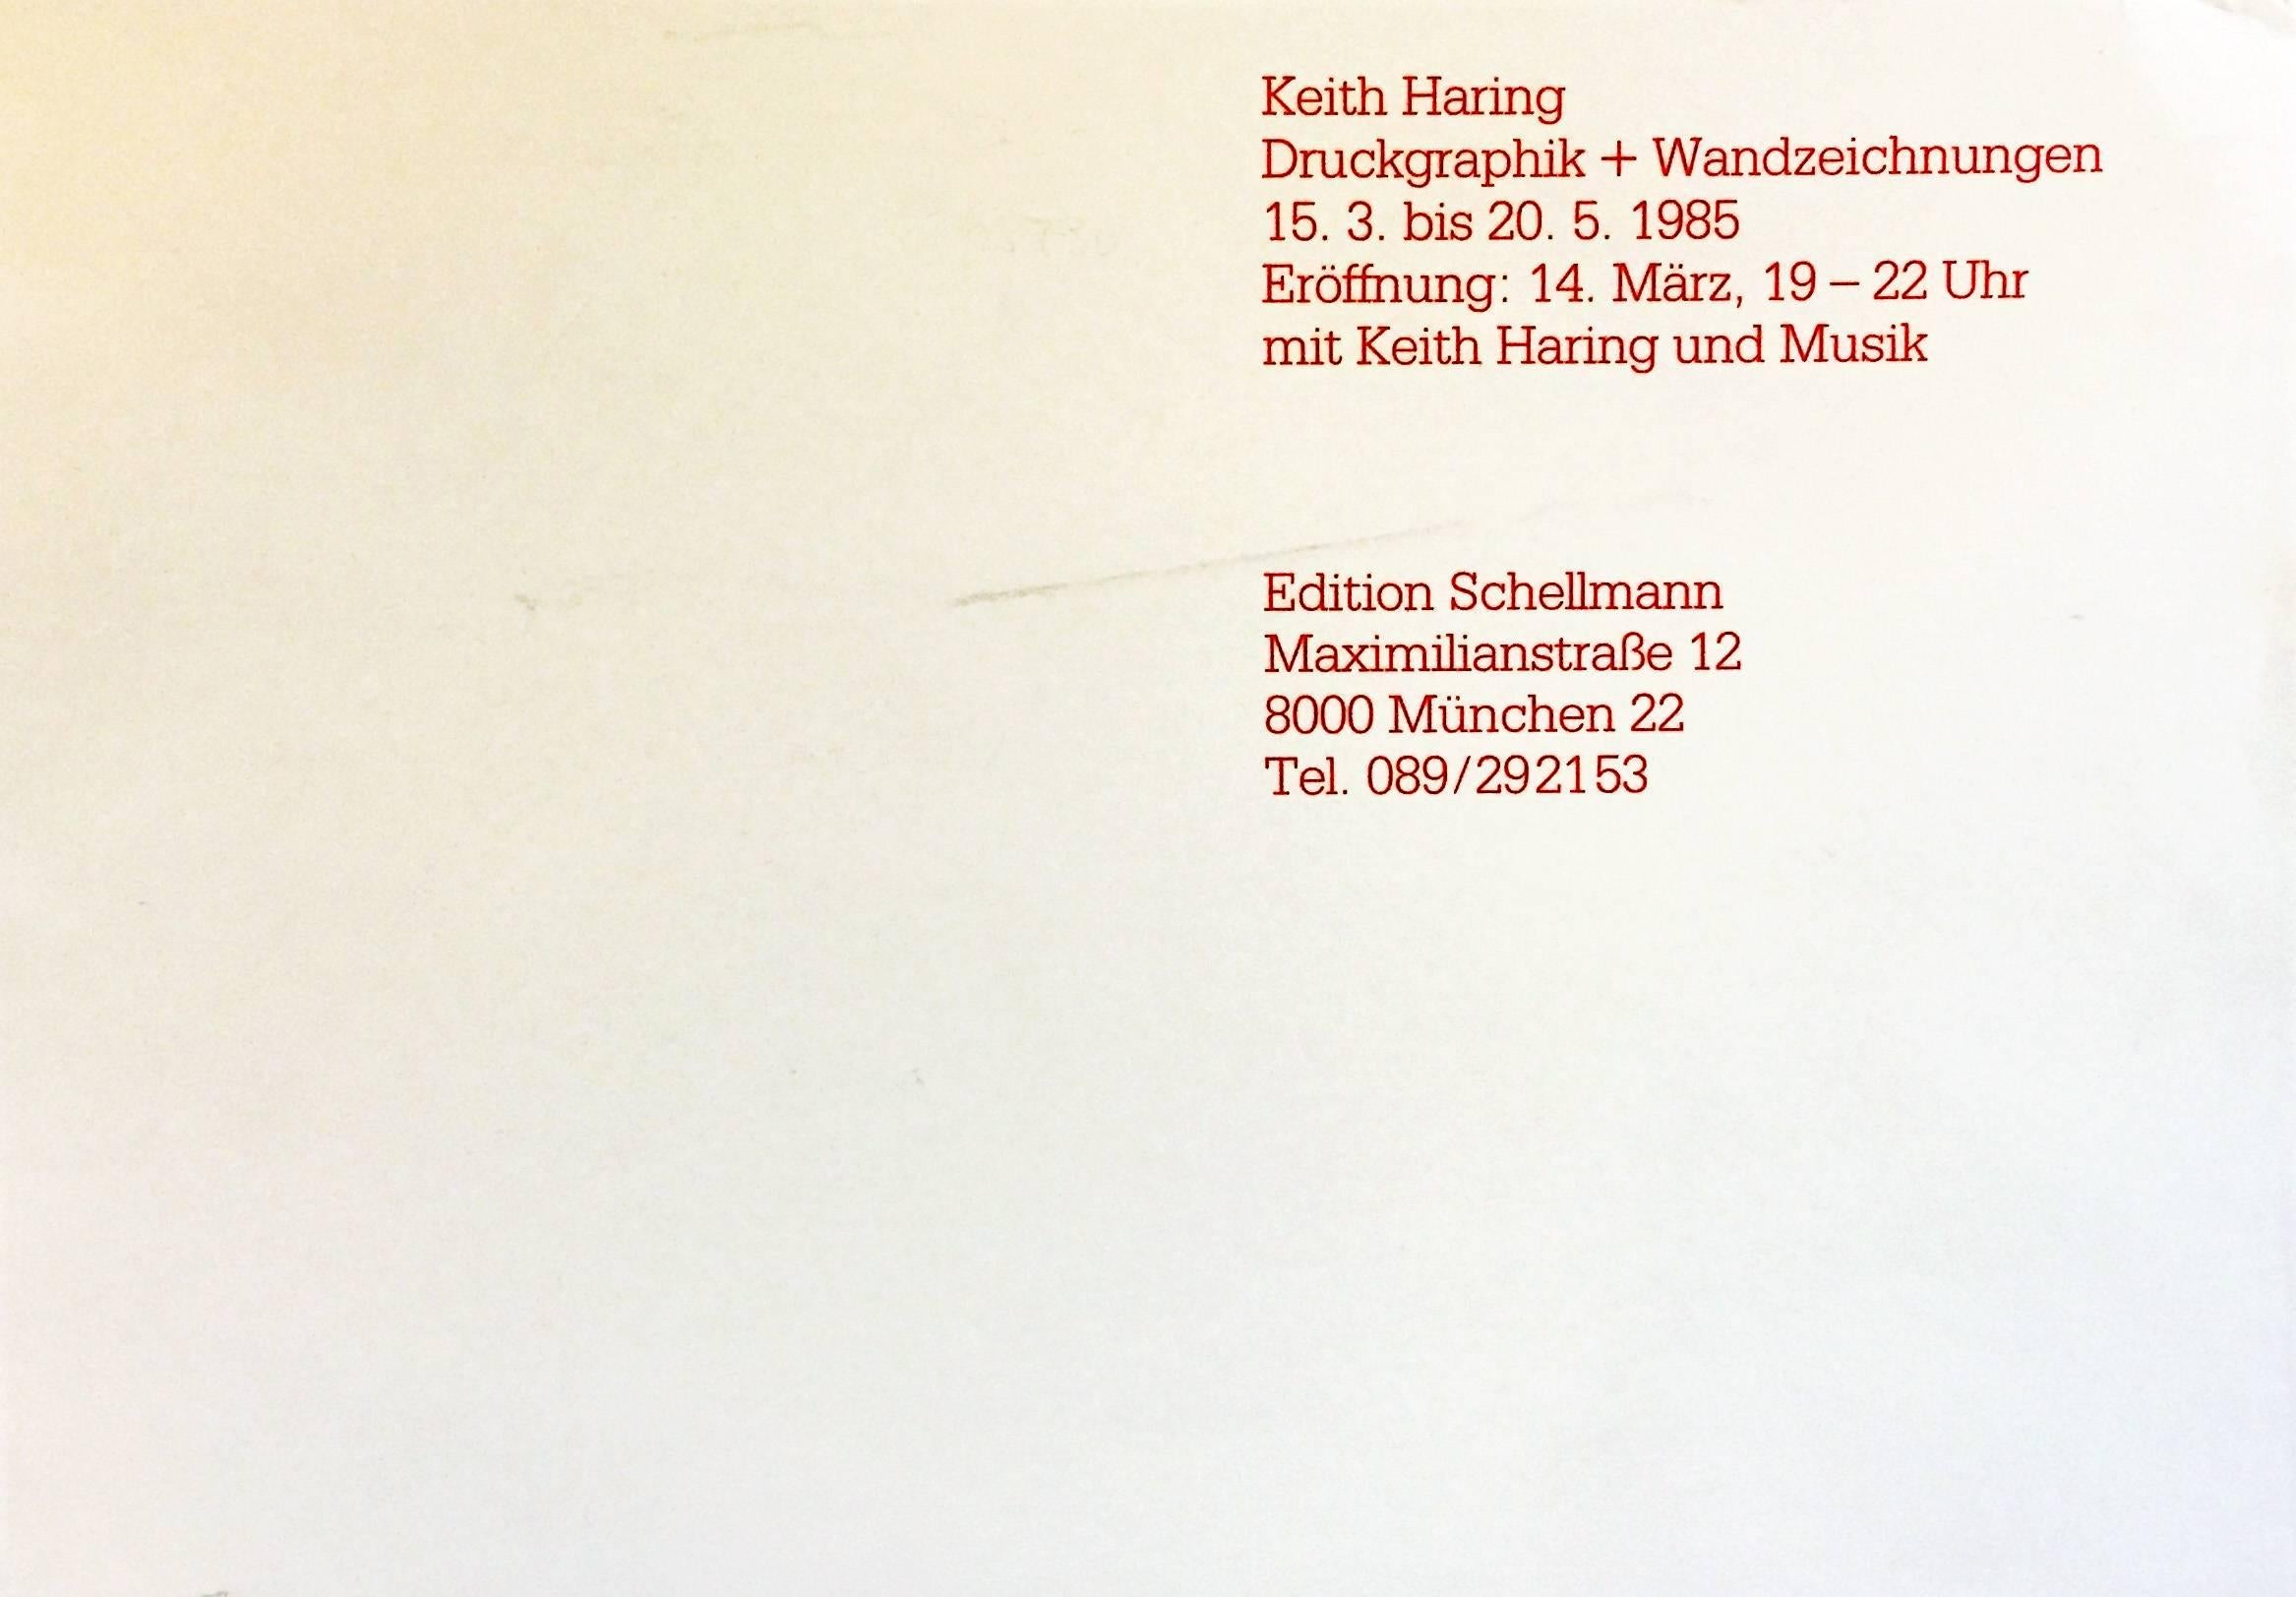 After Keith Haring, Vintage Gallery Poster Card Munich, 1985
The rare announcement and invitation for an early German exhibition of Keith Haring's work, and presence at the opening. 

Bold, unique Haring imagery that would look quite cool when